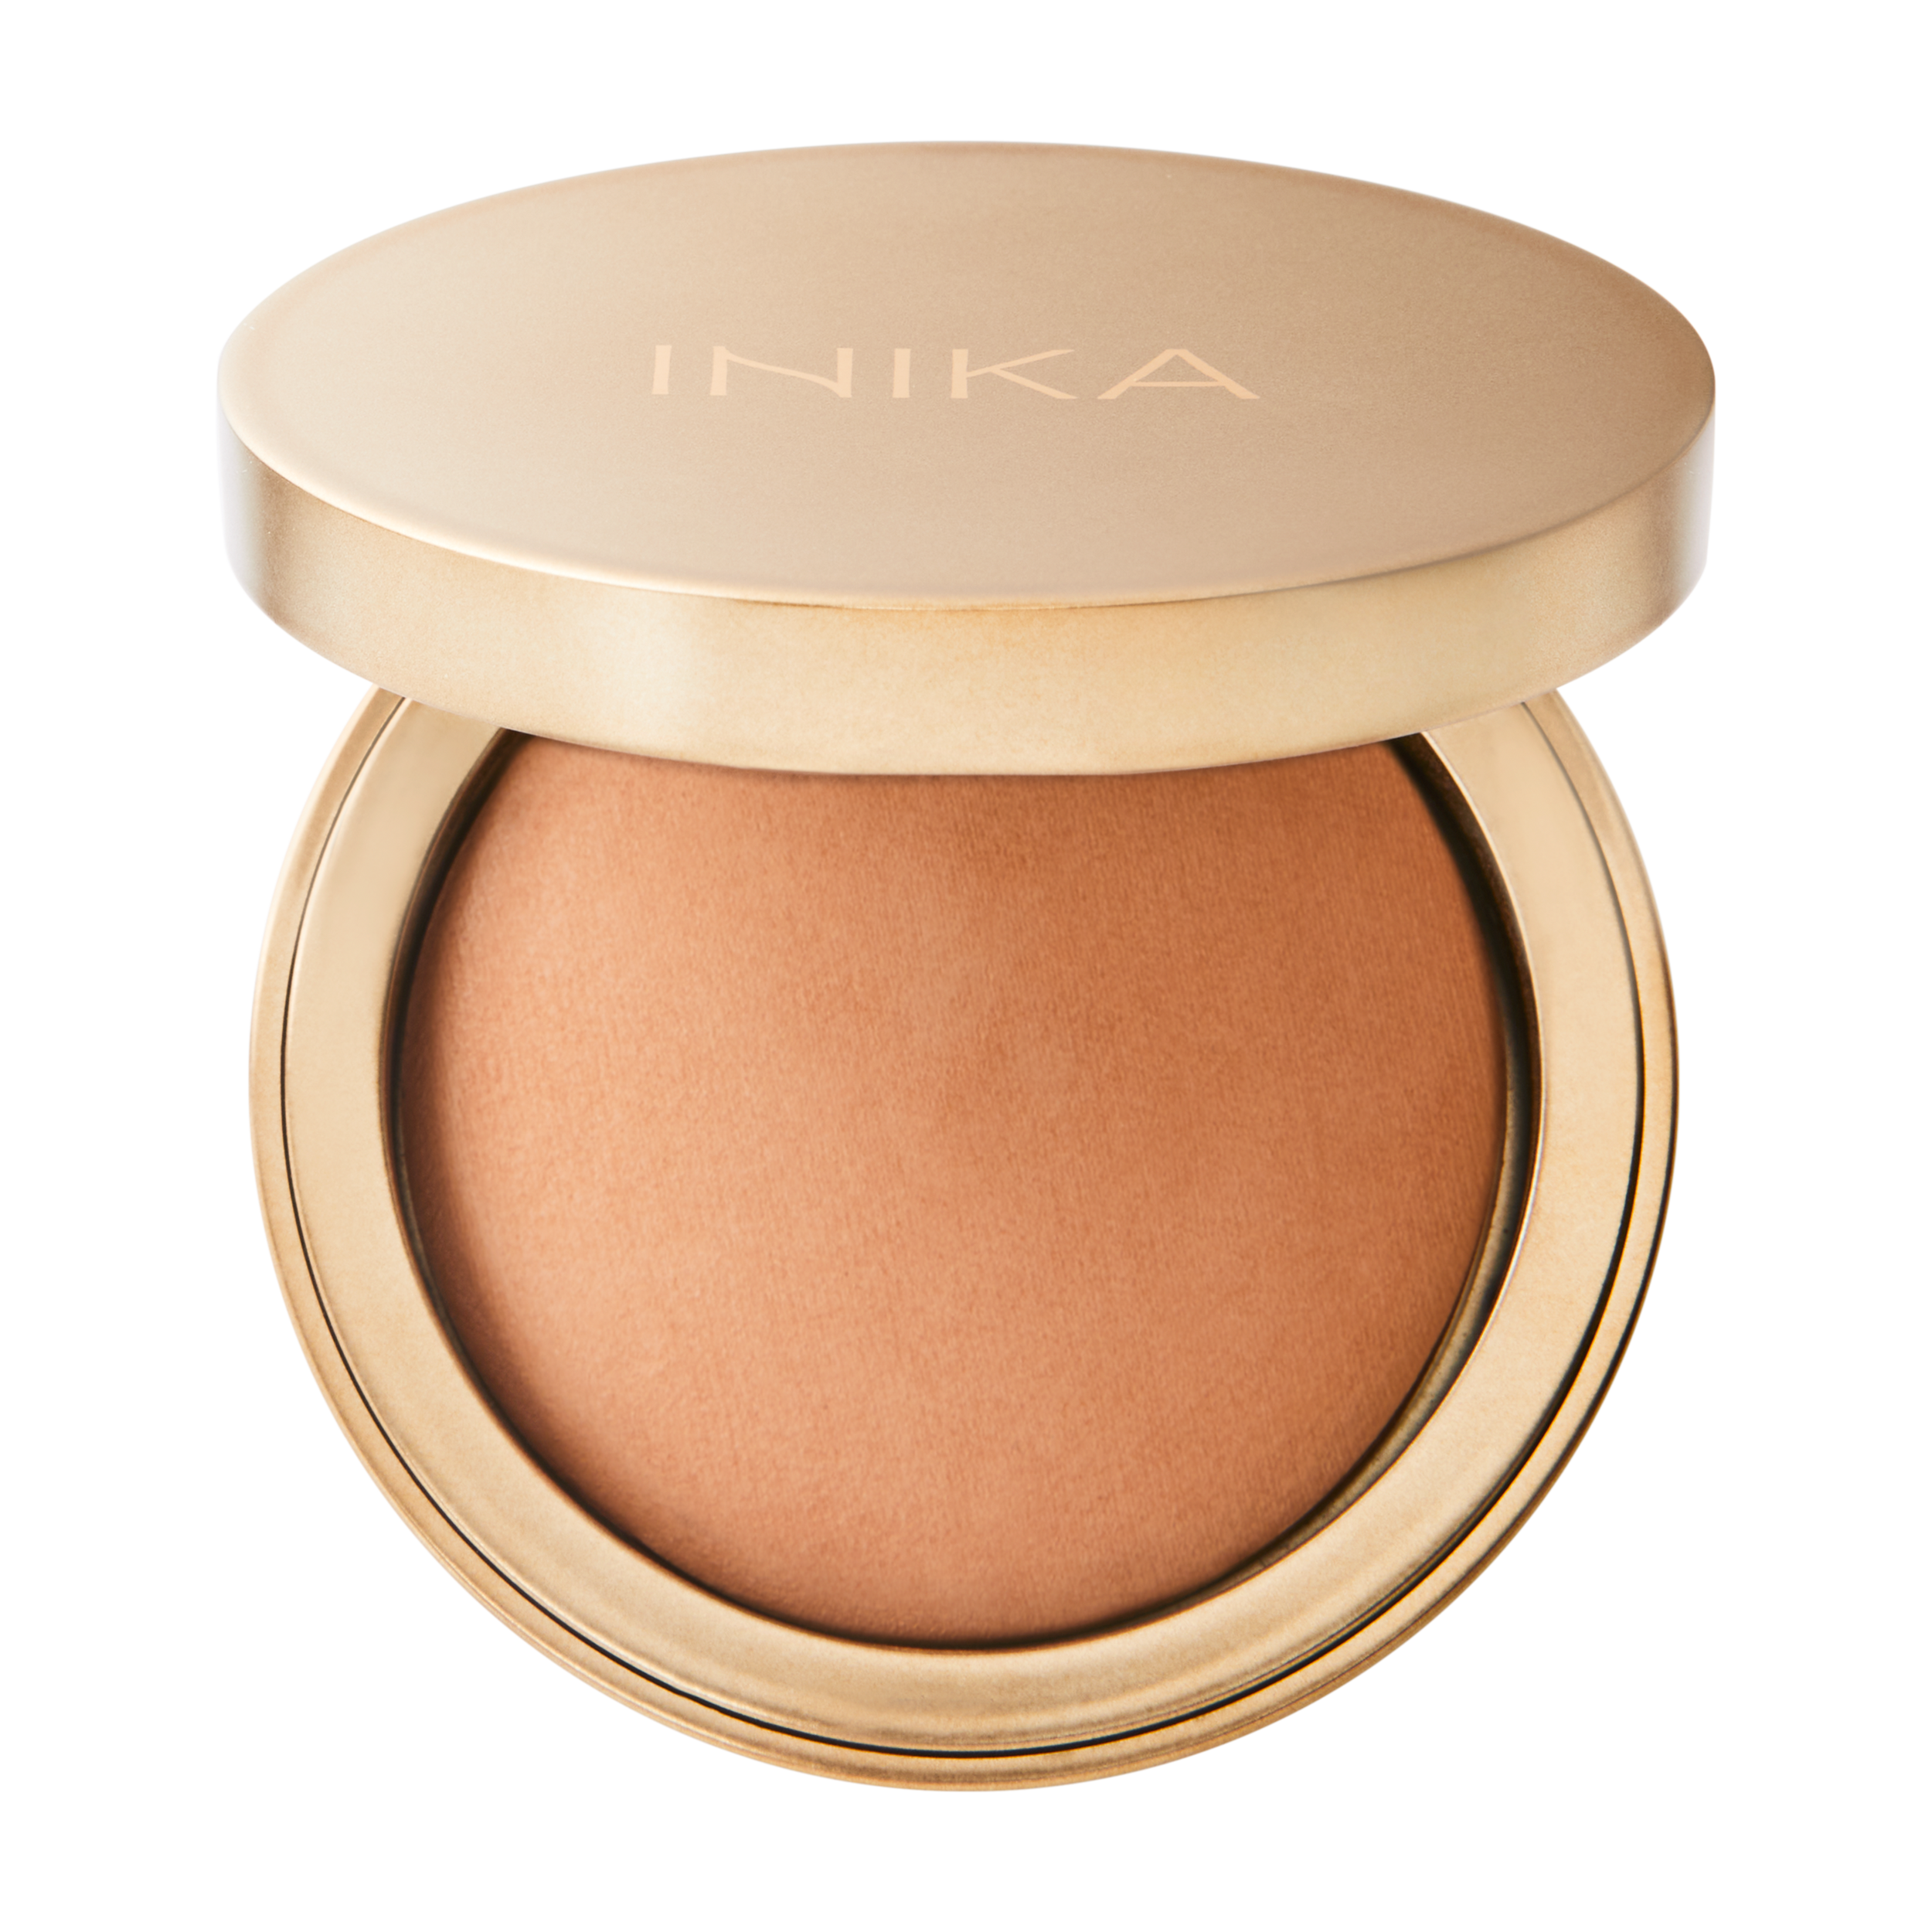 INIKA Organic Baked Mineral Bronzer in Sunkissed